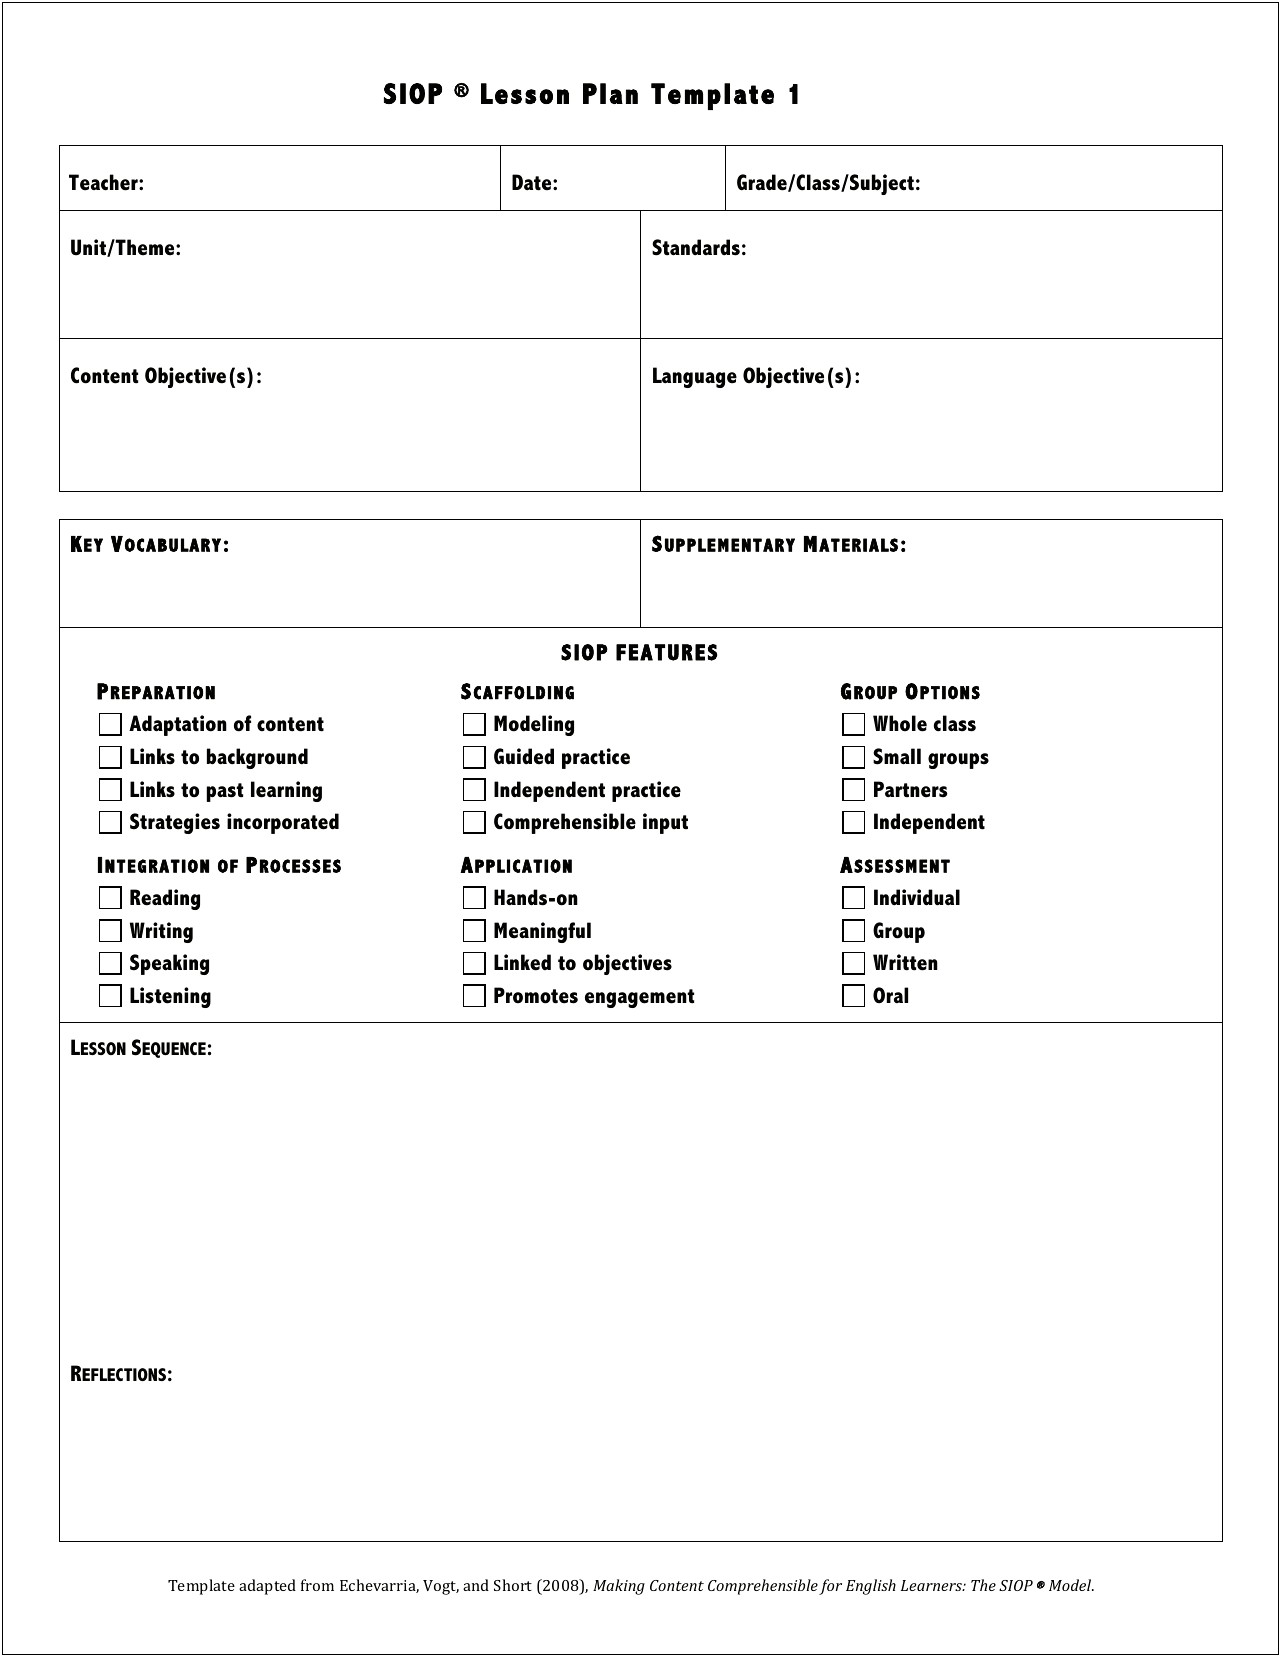 Siop Lesson Plan Template 1 Word Document